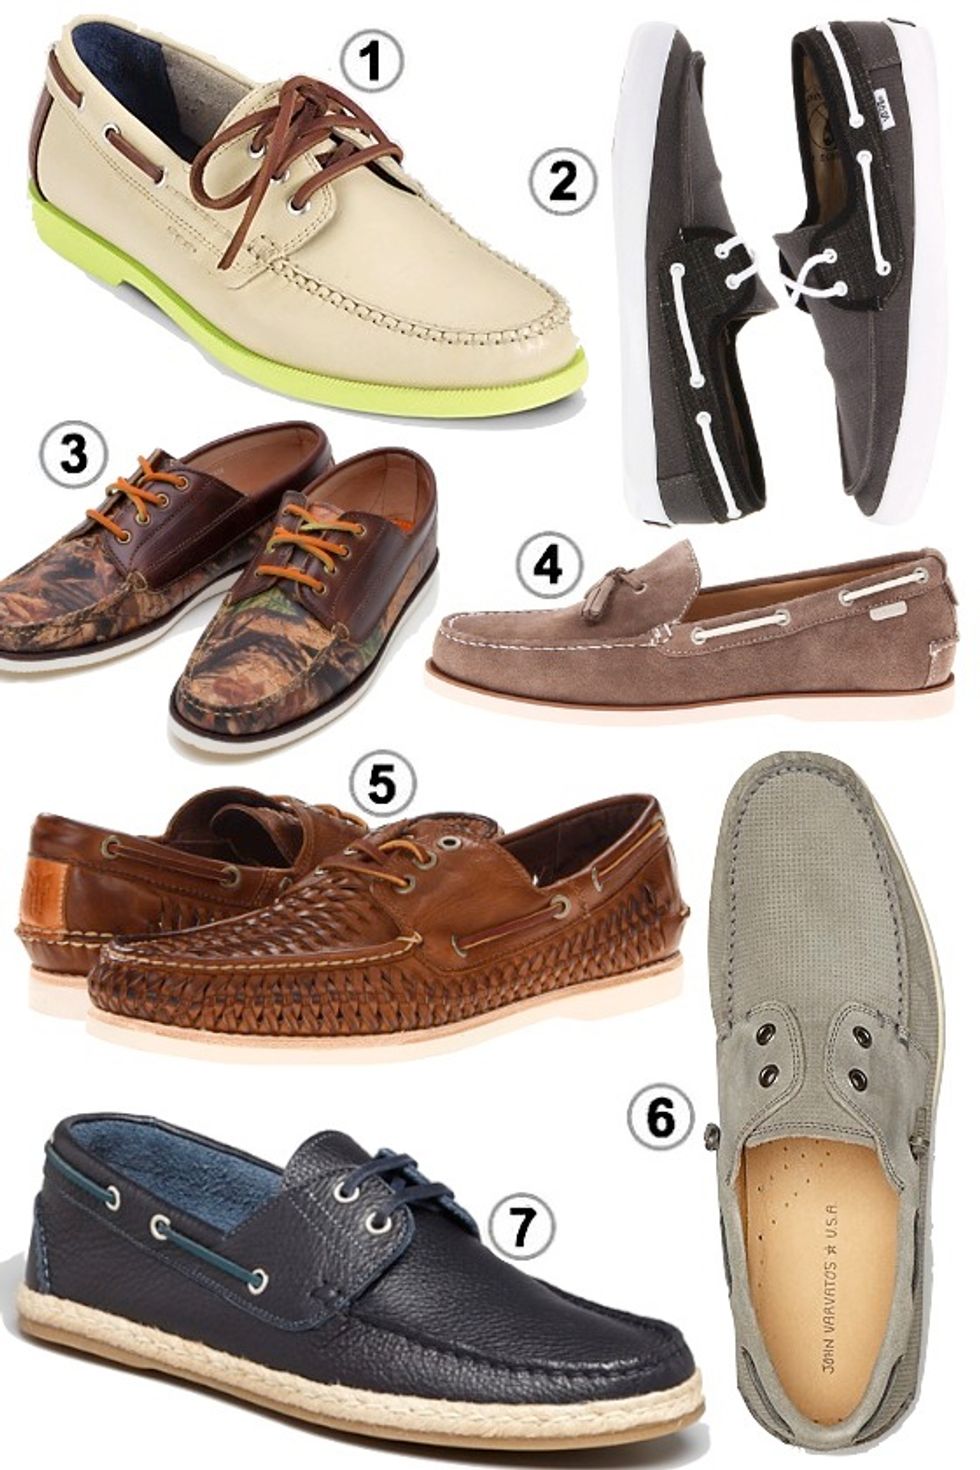 Look of the Week: The New Boat Shoe